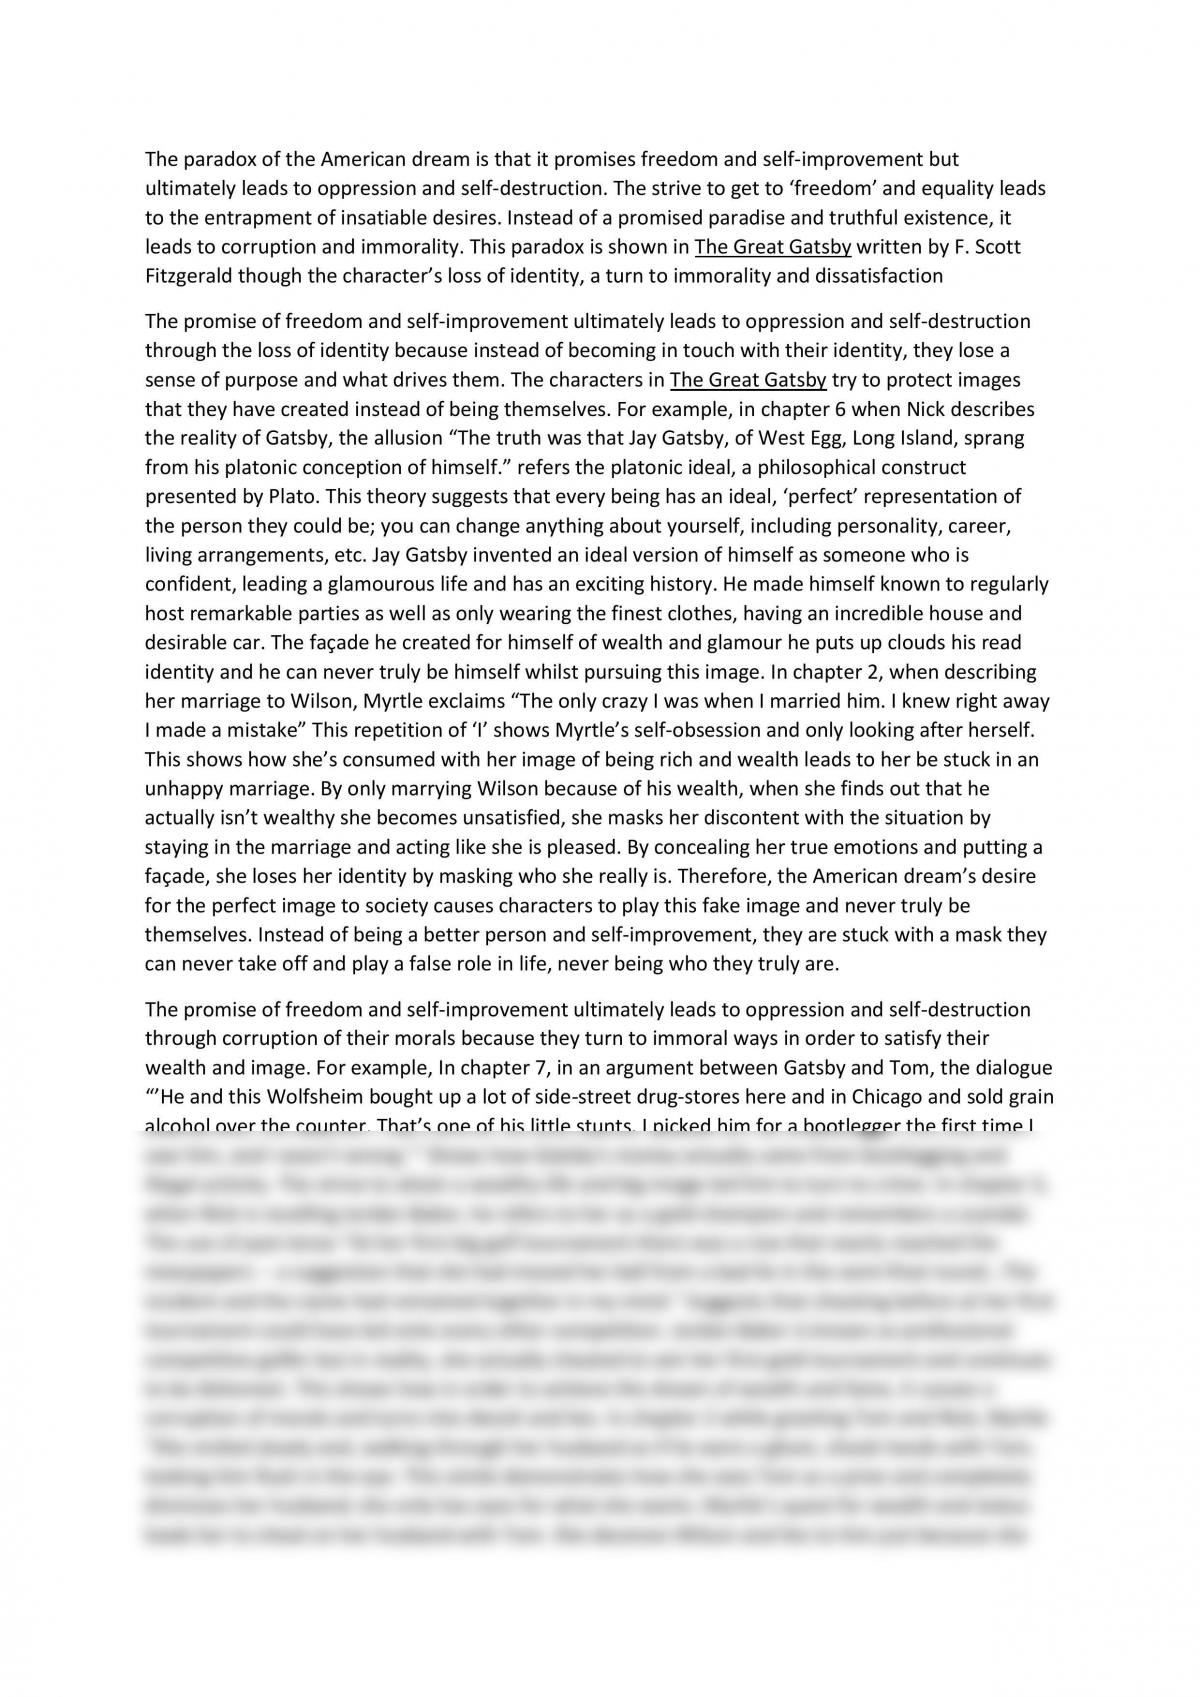 essay about the great gatsby american dream